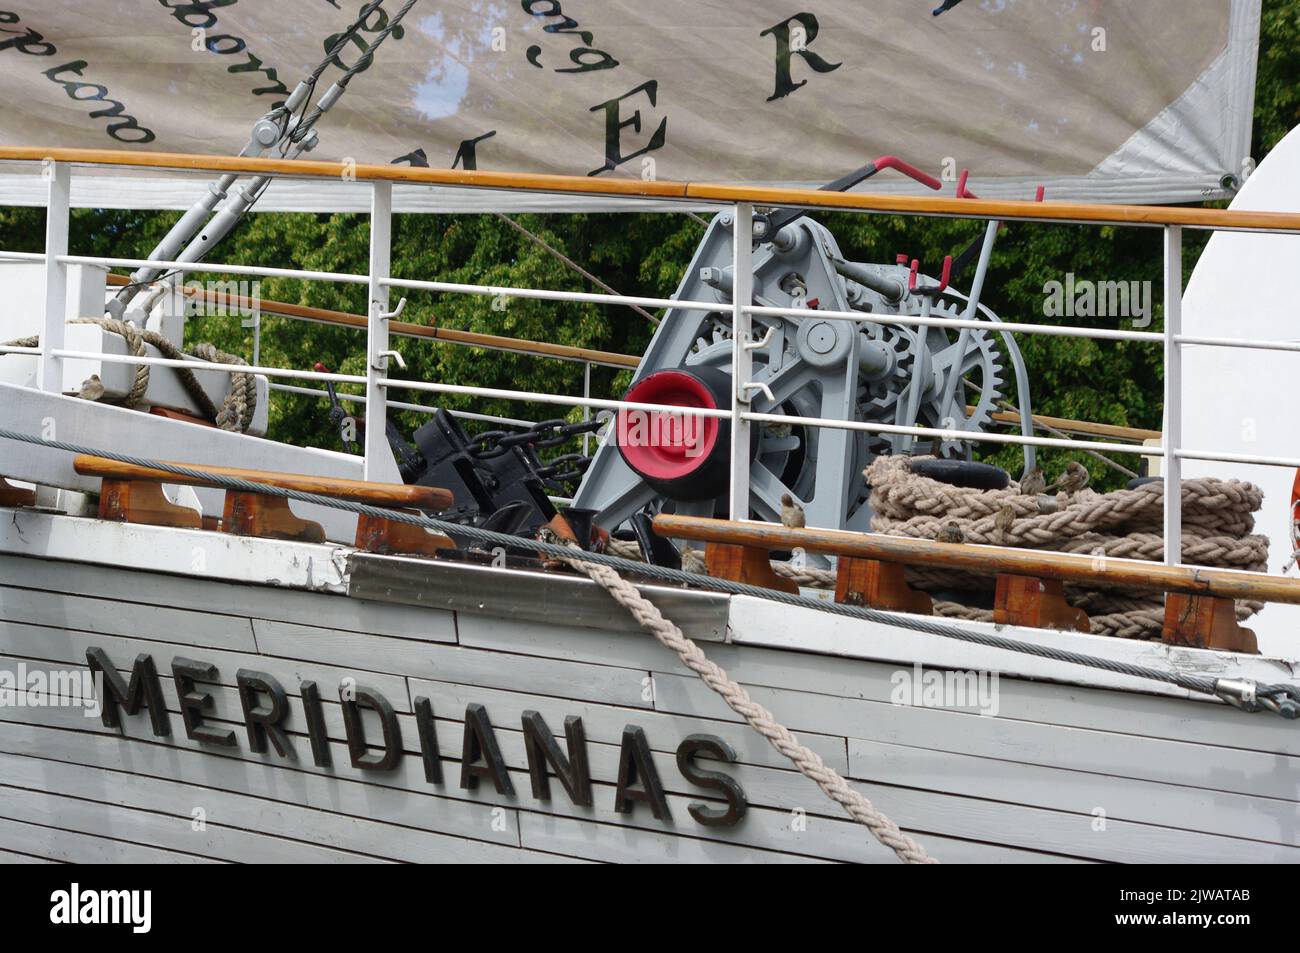 KLAIPEDA, LITHUANIA - 09 August 2022 Sailboat Meridianas former training ship, currently a restaurant on the embankment of the river Dane Stock Photo